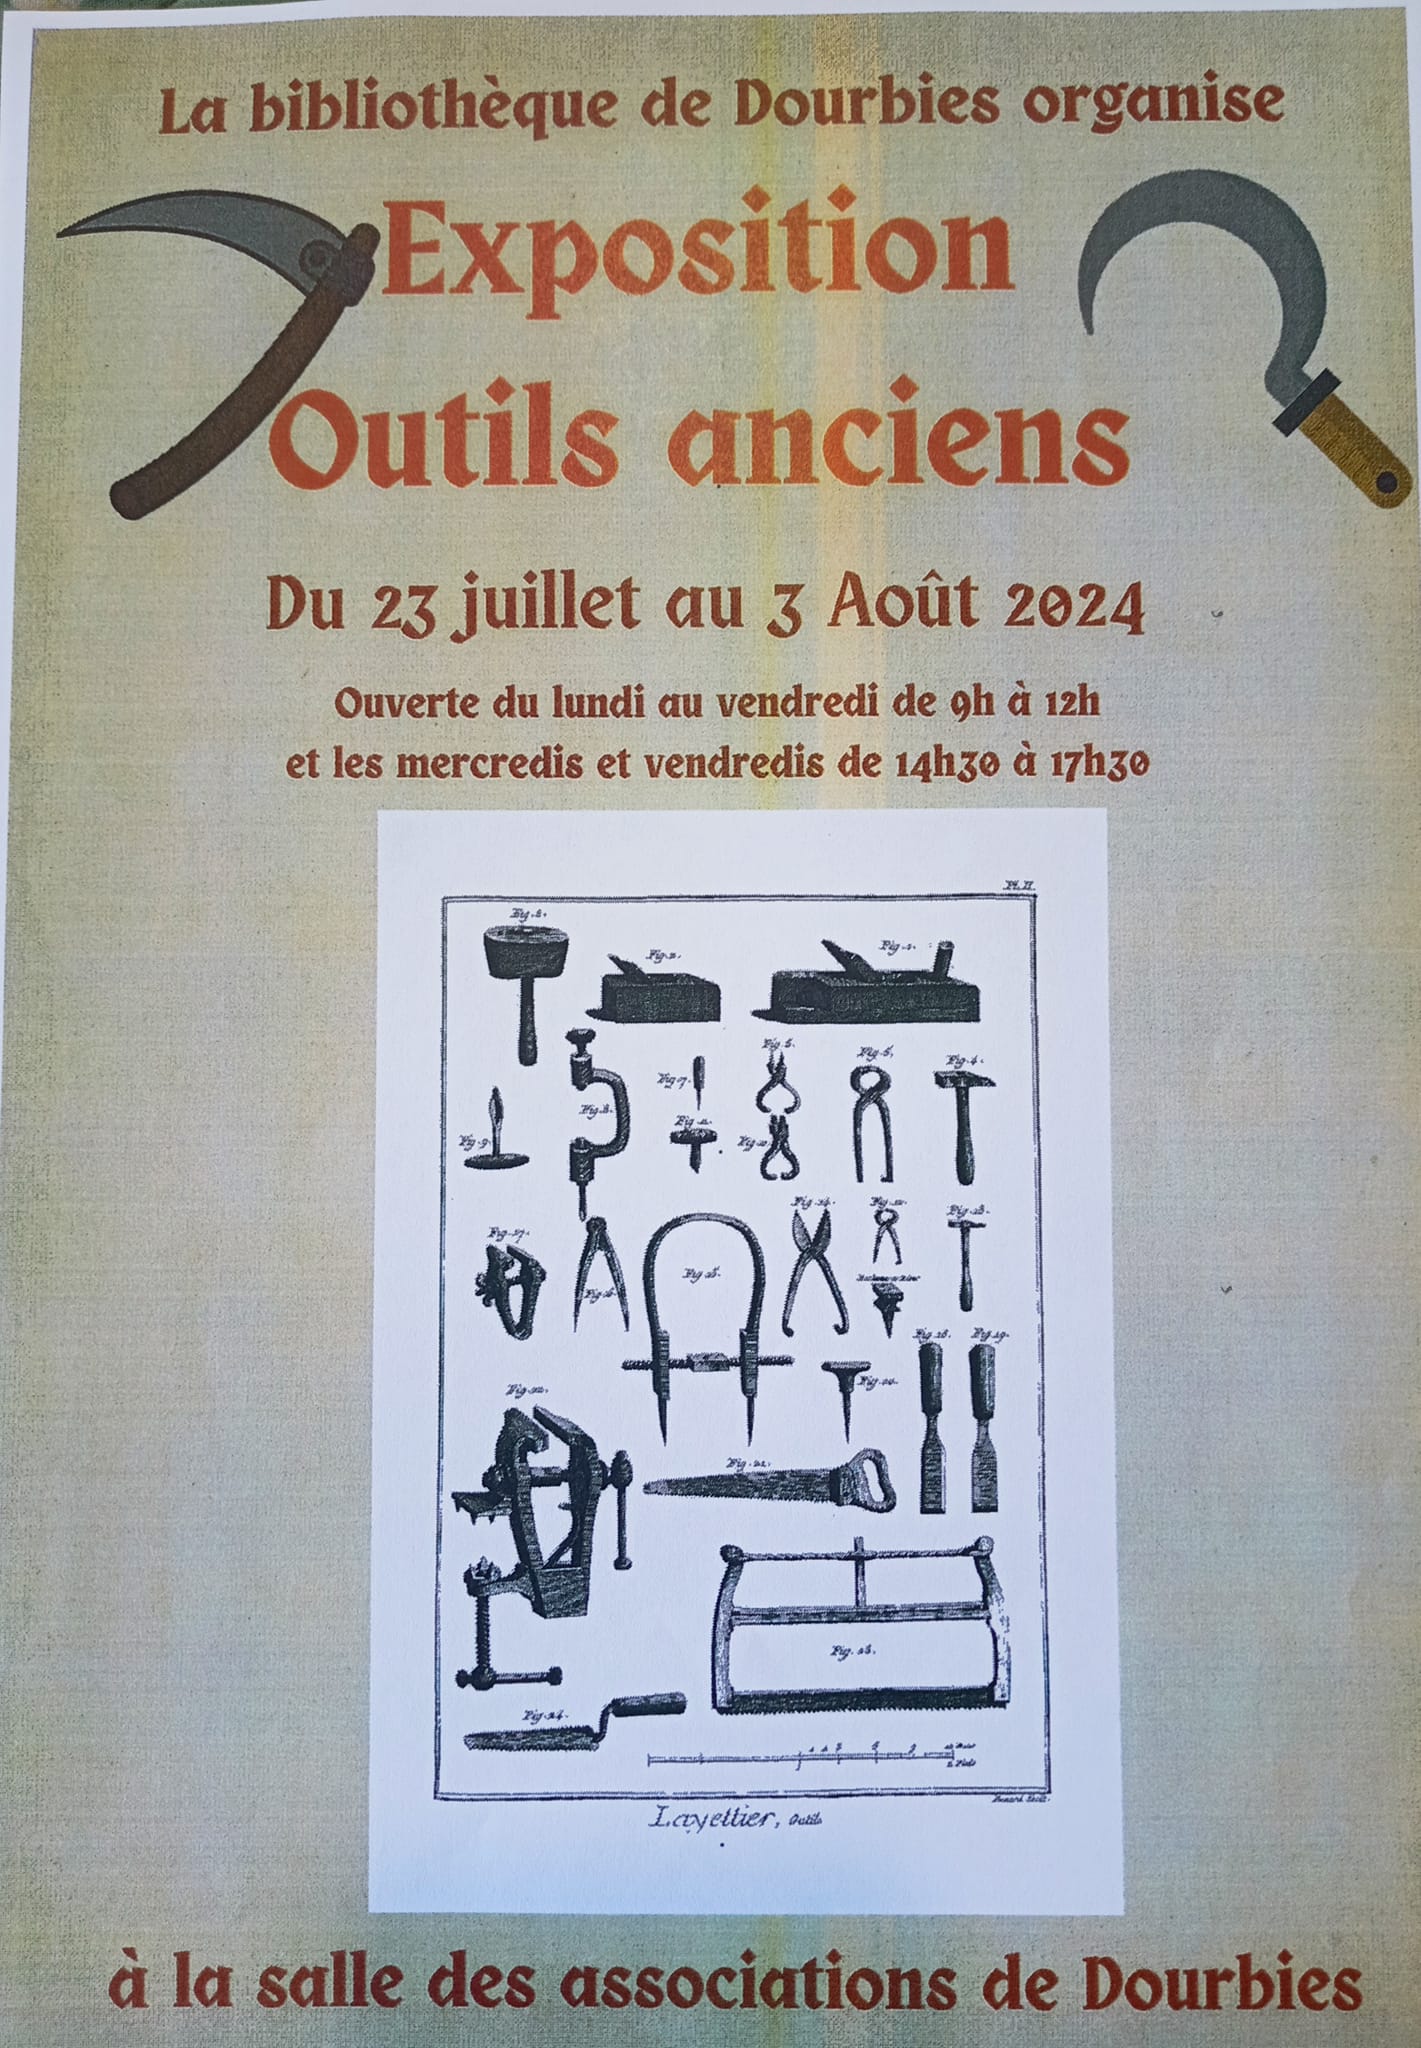 Expo Outils anciens